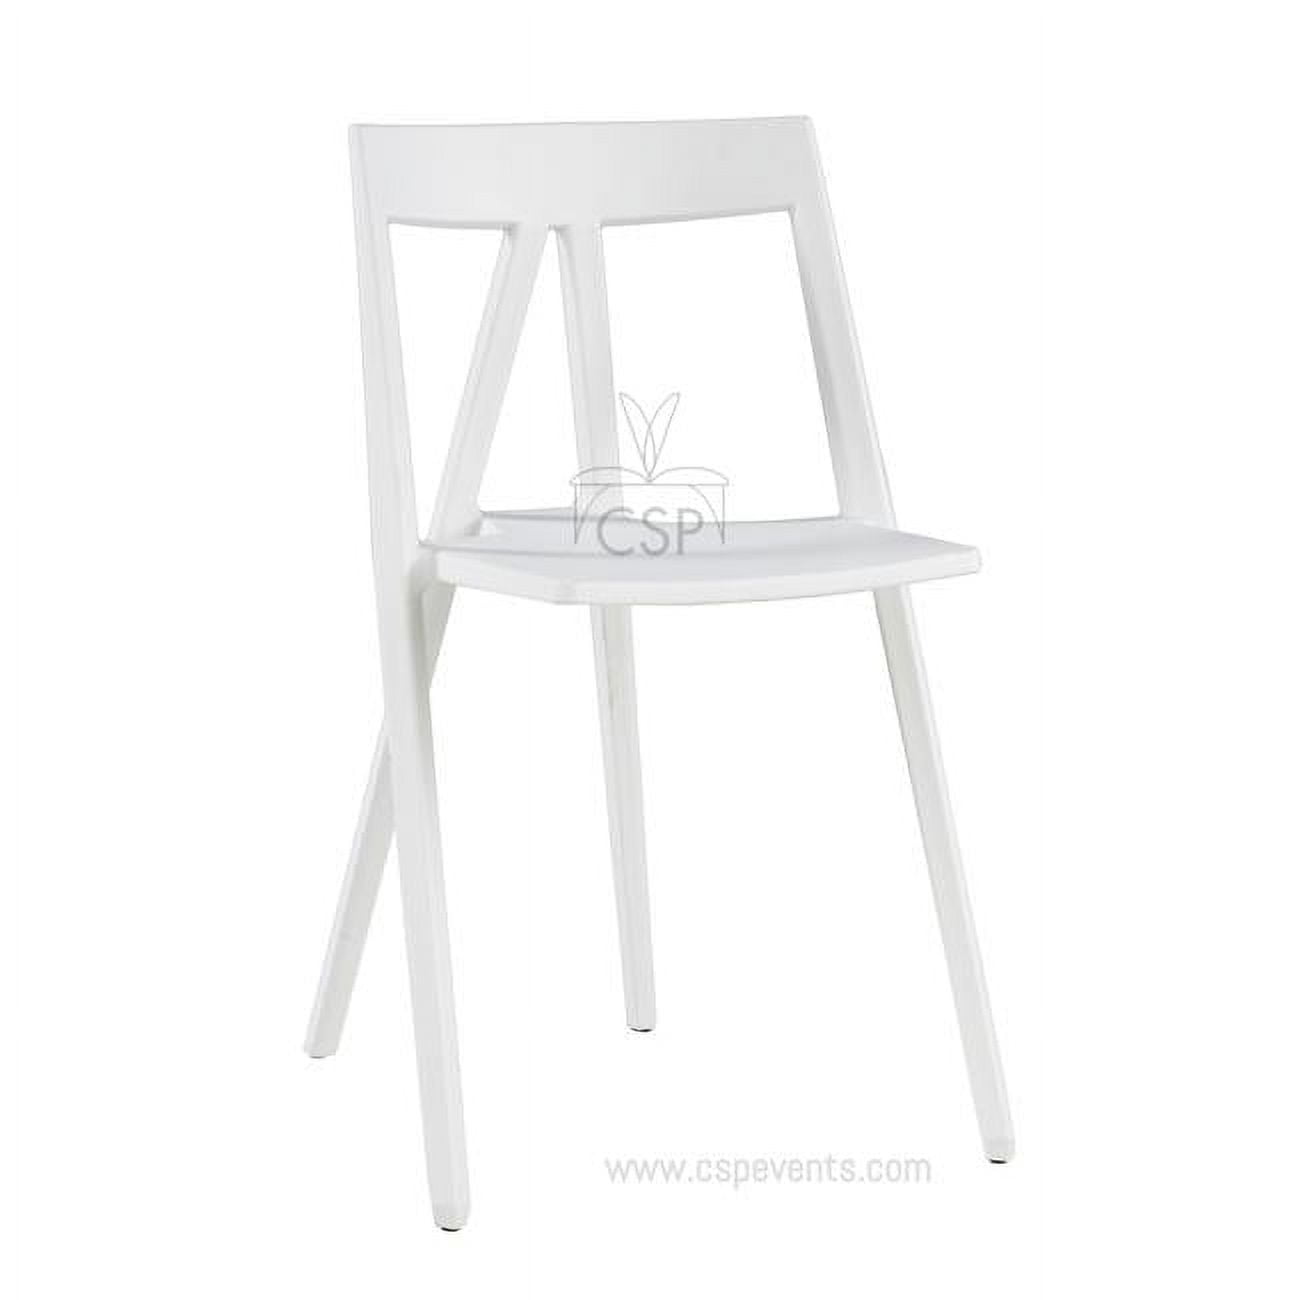 Picture of Commercial Seating Products RPP-MILAN-Wh-4 Milan Resin Polypropylene Stackable Event Chair  White - 29.5 in. - Set of 4